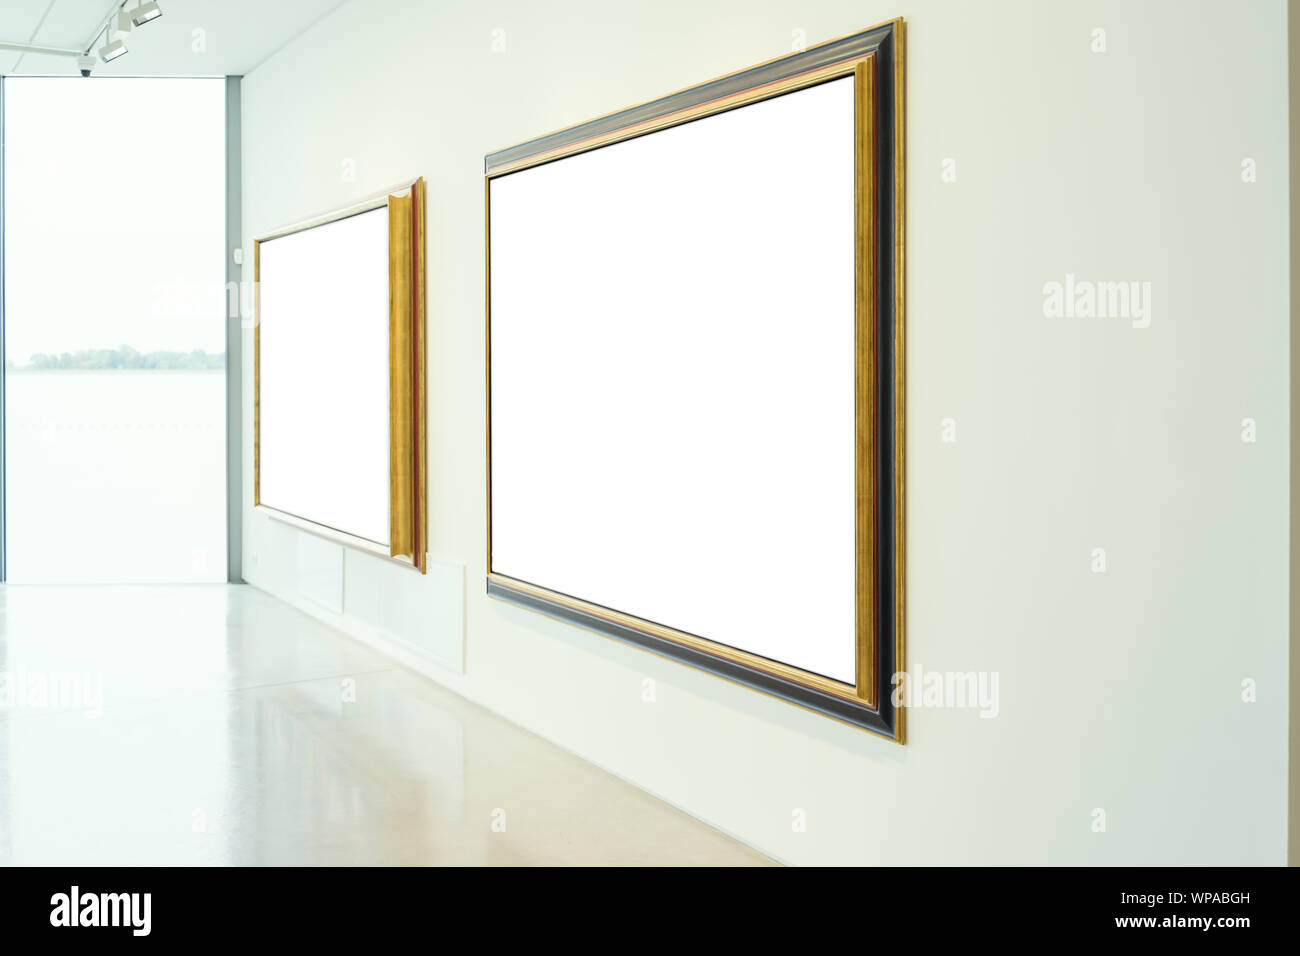 Art Gallery Museum Isolated Frame Contemporary White Wall Rectangular Clipping Path Stock Photo